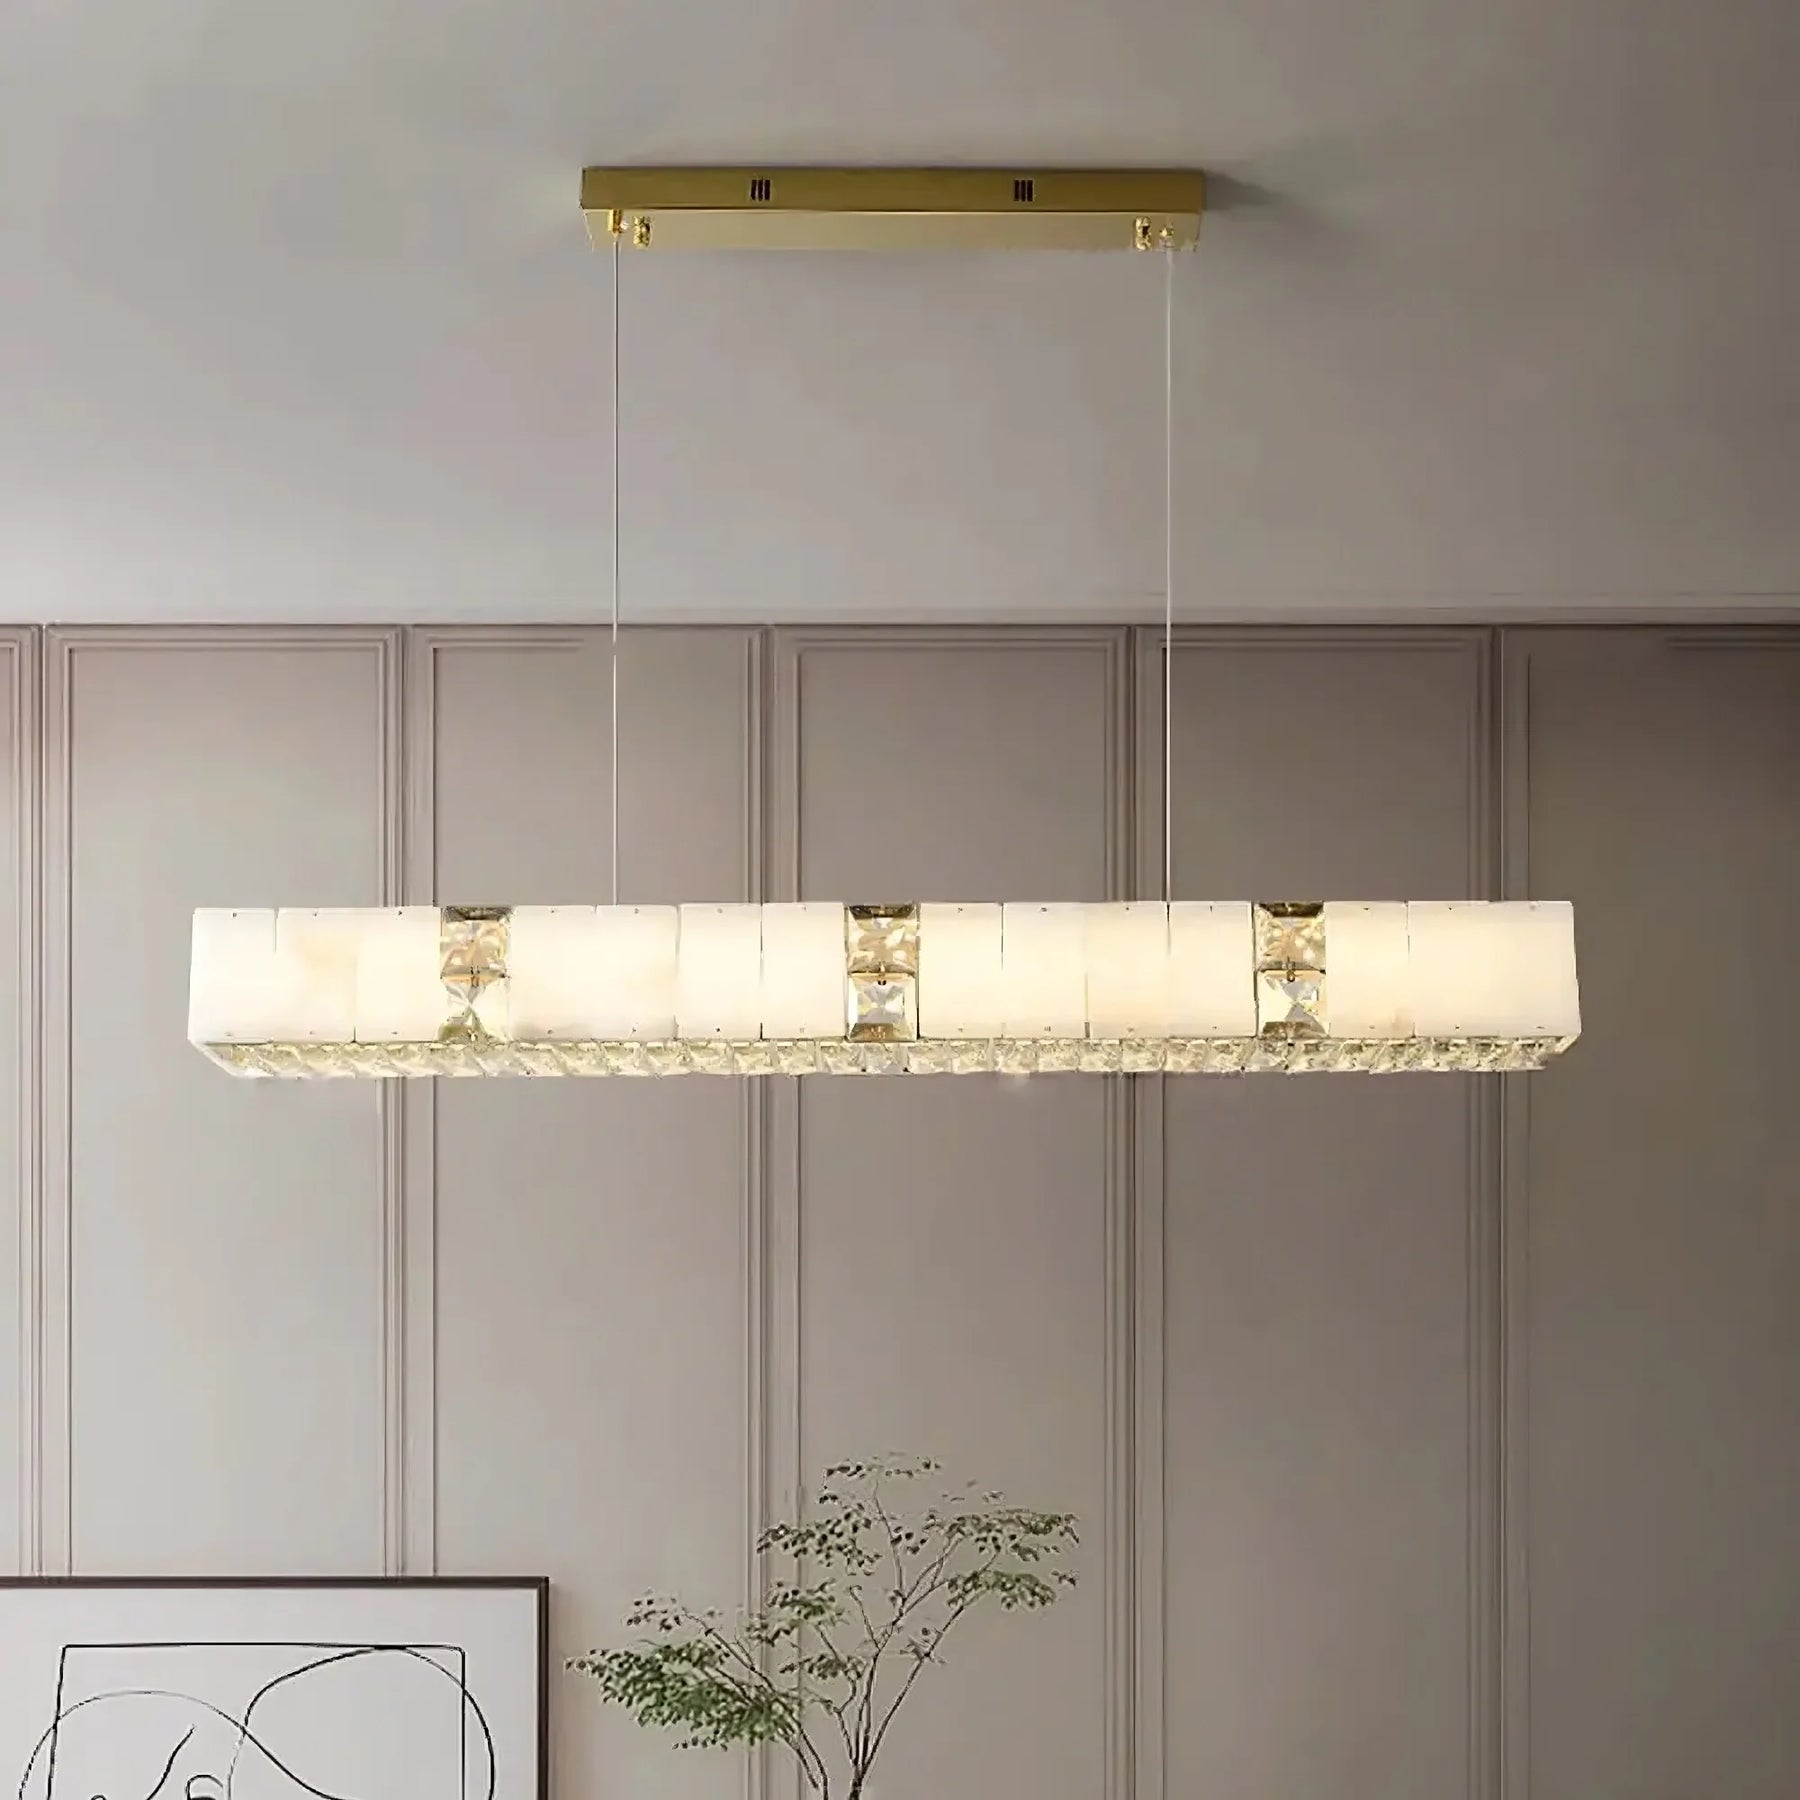 A Natural Marble & Crystal Modern Ceiling Light Fixture by Morsale.com hangs from the ceiling, featuring an elongated frosted glass shade with brass accents. The minimalist, geometric design of this luxury home décor piece complements the room's muted wall panels, abstract art, and minimalist decor.